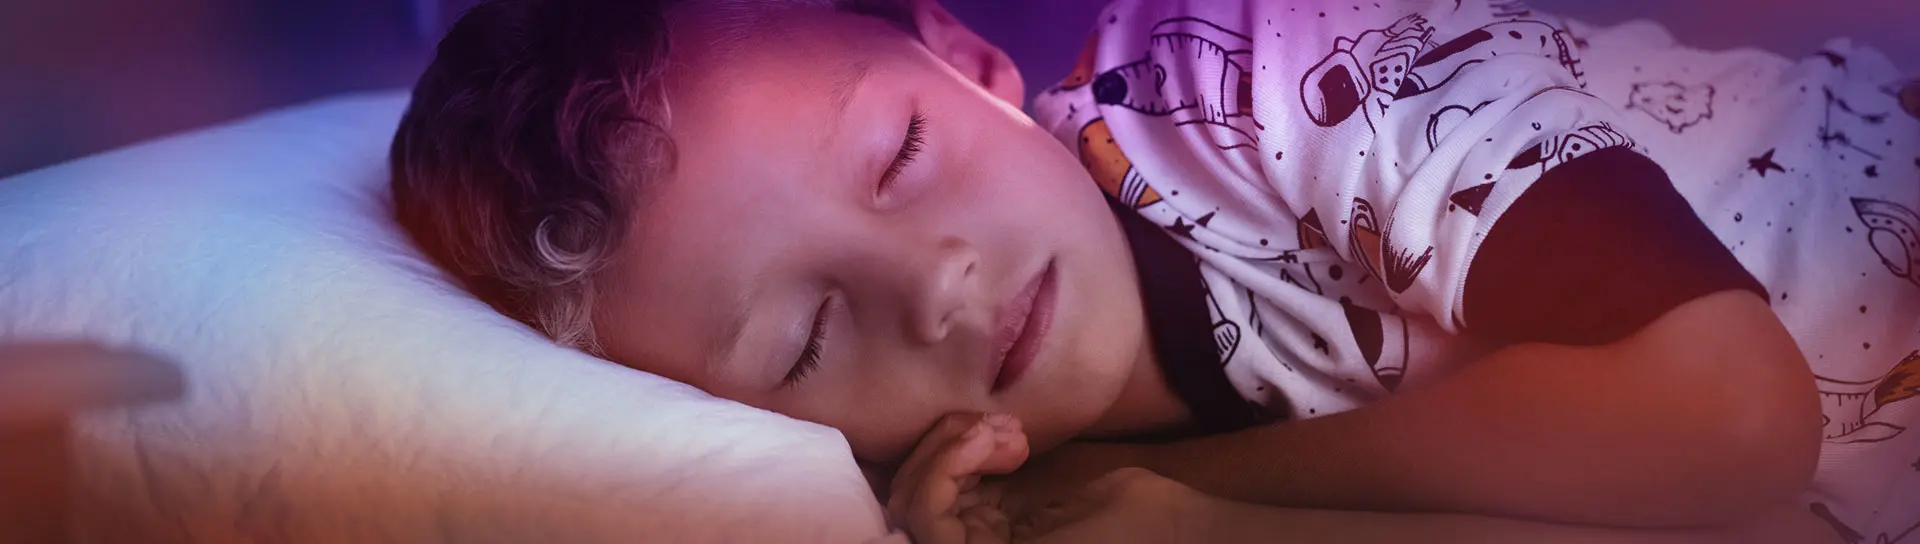 A little boy lying on side on bed and sleeping in bedroom decorated with planets and stars.